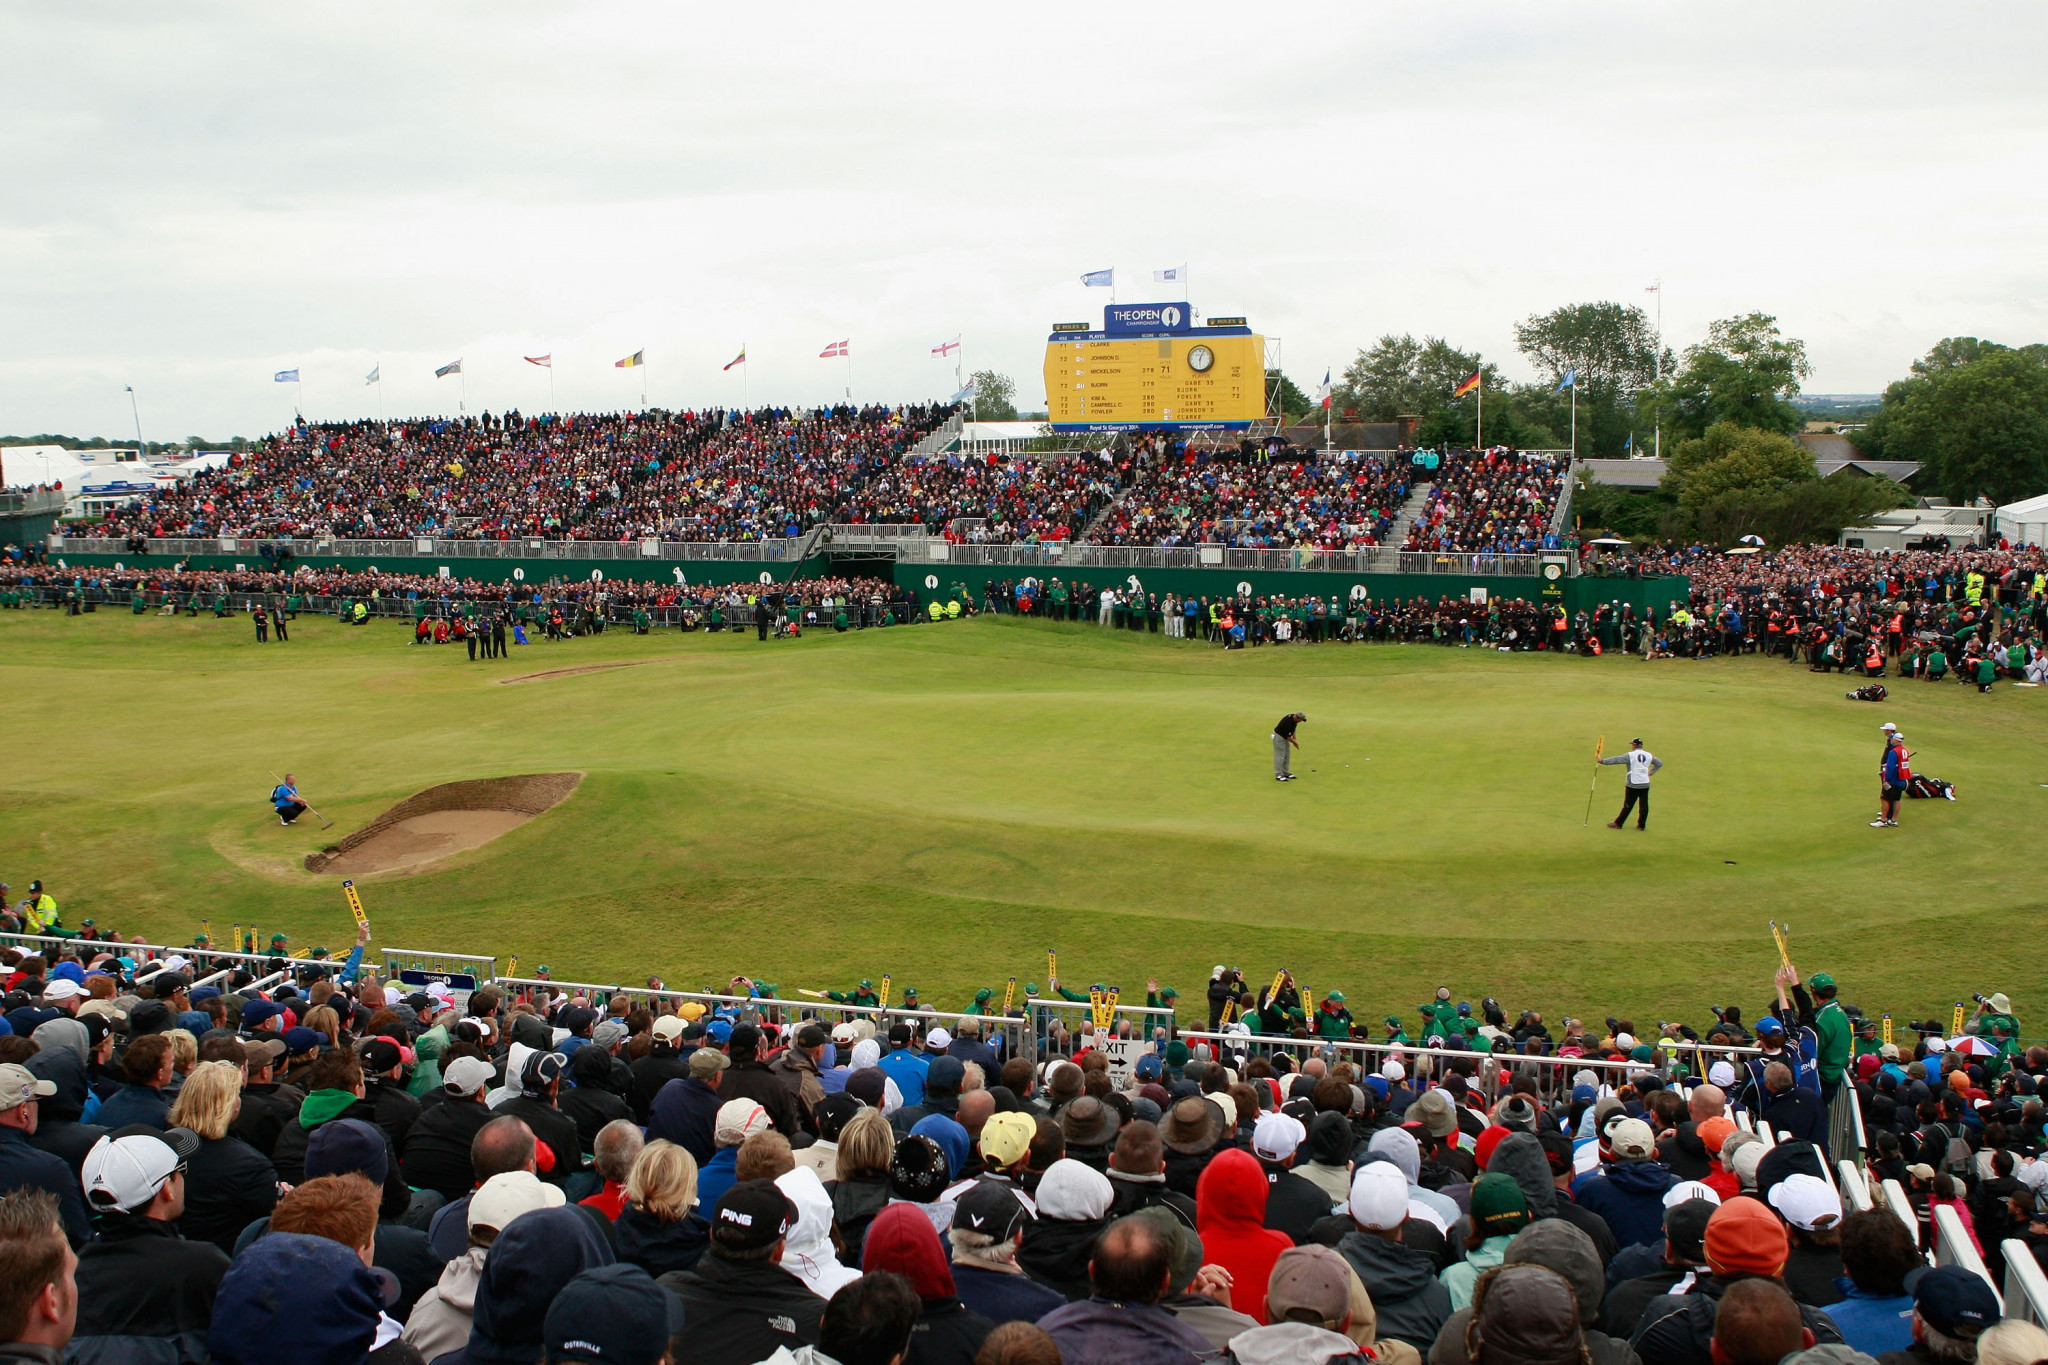 More than 180,000 spectators attended during the four days of the 2011 Open, the last time the event was staged at Royal St George's when the winner was Northern Ireland's Darren Clarke ©Getty Images